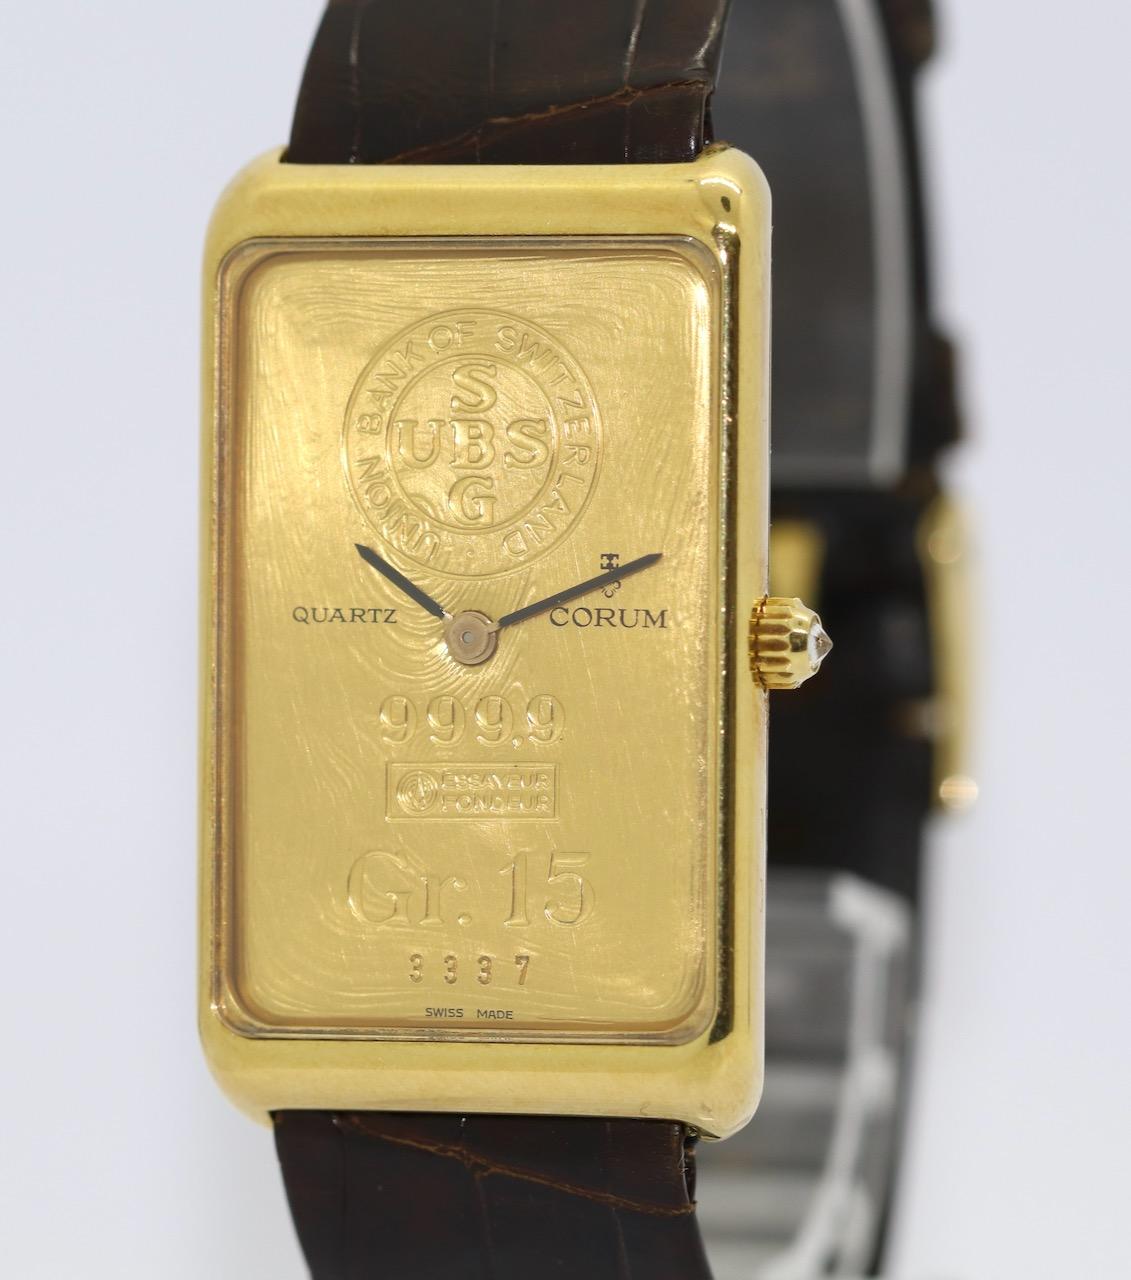 18 Karat Gold Corum Wrist Watch with Gr. 15 UBS SBG Gold Bar in 24K Ref. 4440056

18 Karat solid Gold Case 24 mm x 41 mm. 
Quartz movement.
Dial 24k solid fine Gold 15 gram.
Strap and clasp also original Corum.
Clasp Gold plated.

Including